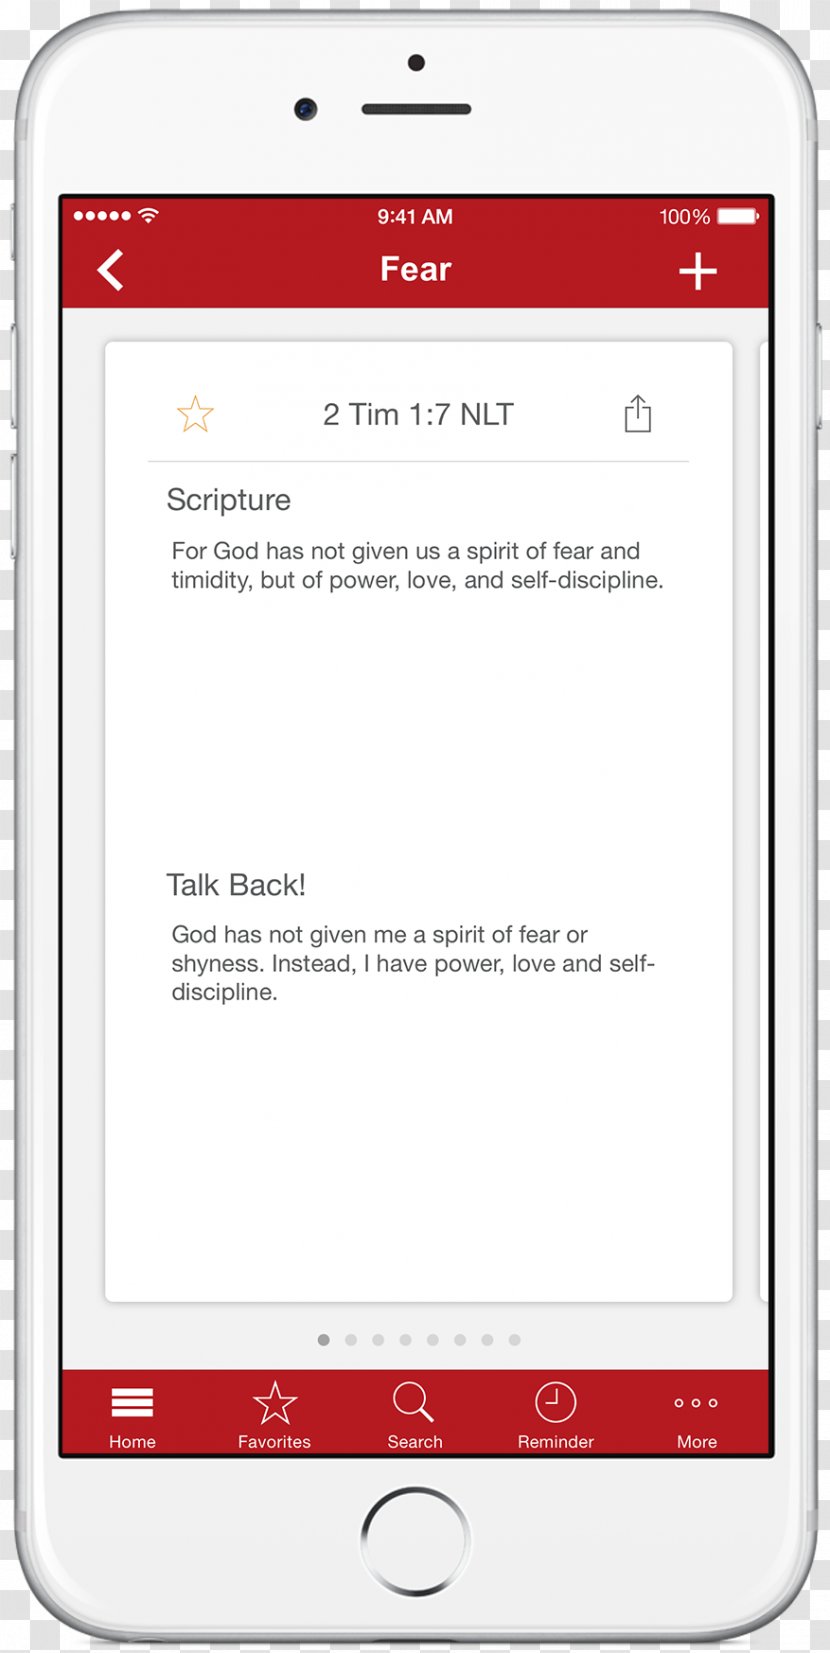 Invoice Email App Store Service - Feature Phone - Spiritual Warfare Transparent PNG